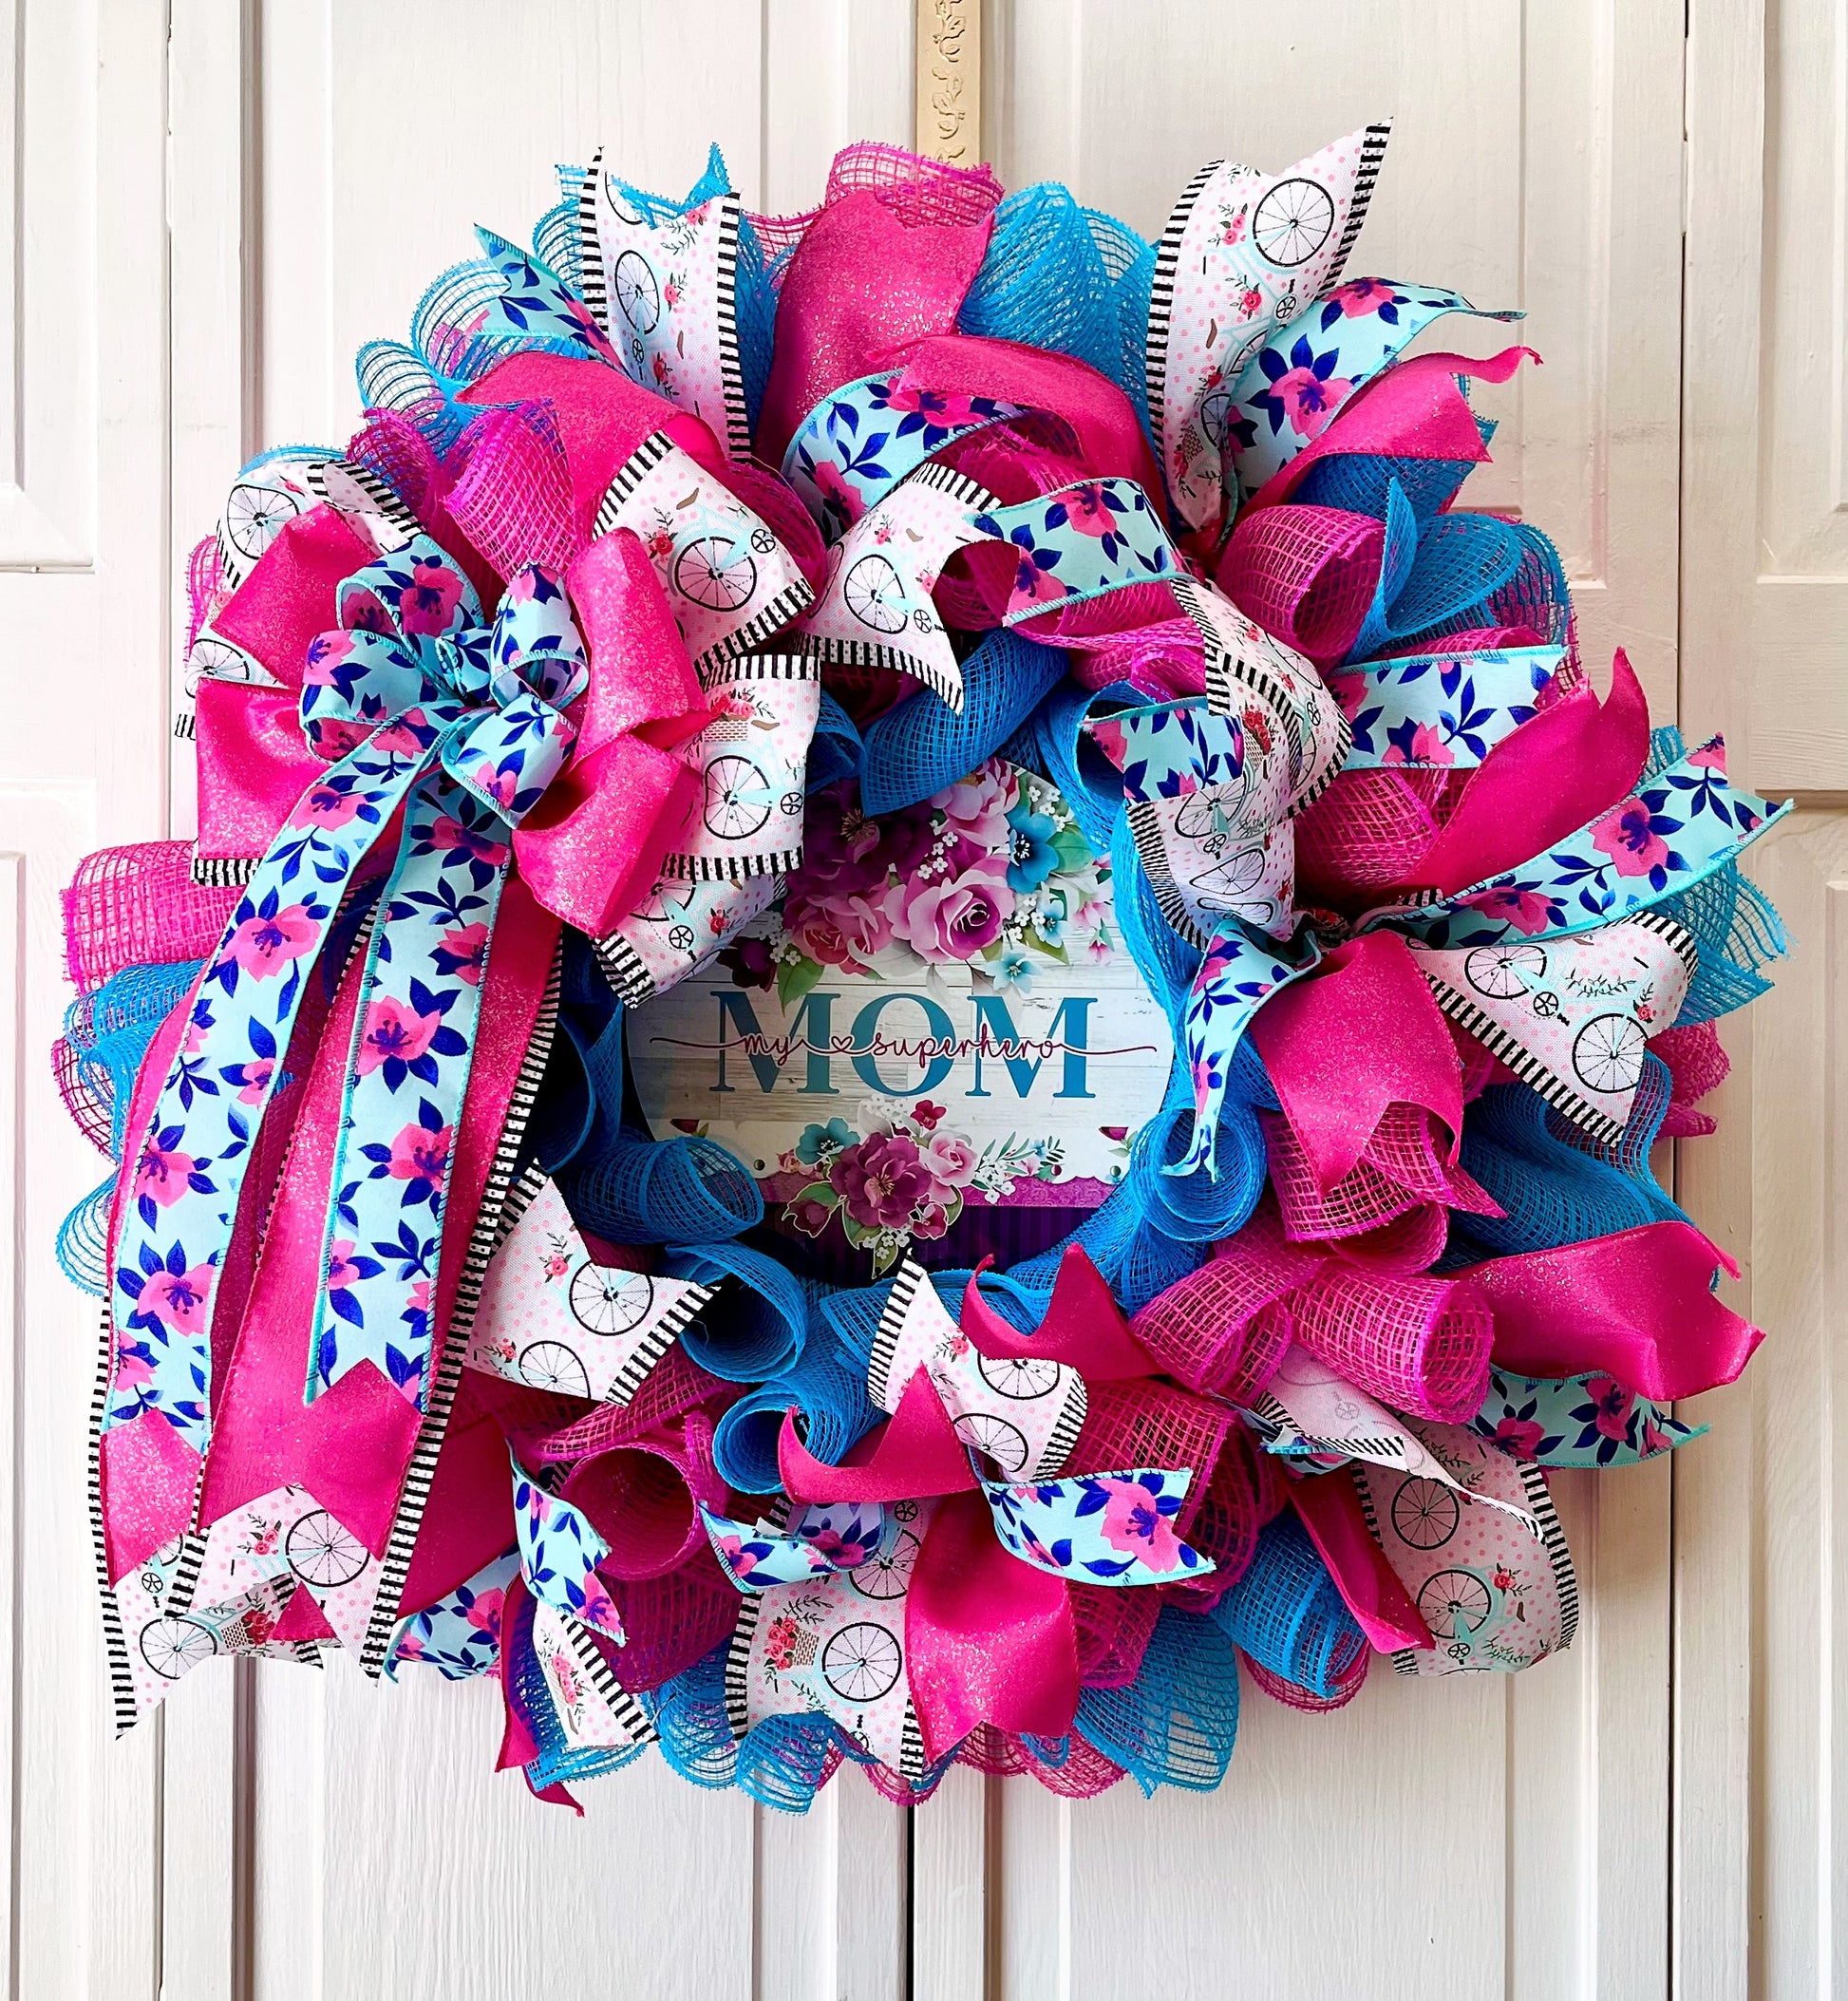 Spring and Summer 24 Fabric Mesh Wreaths - She Shed Home Decor